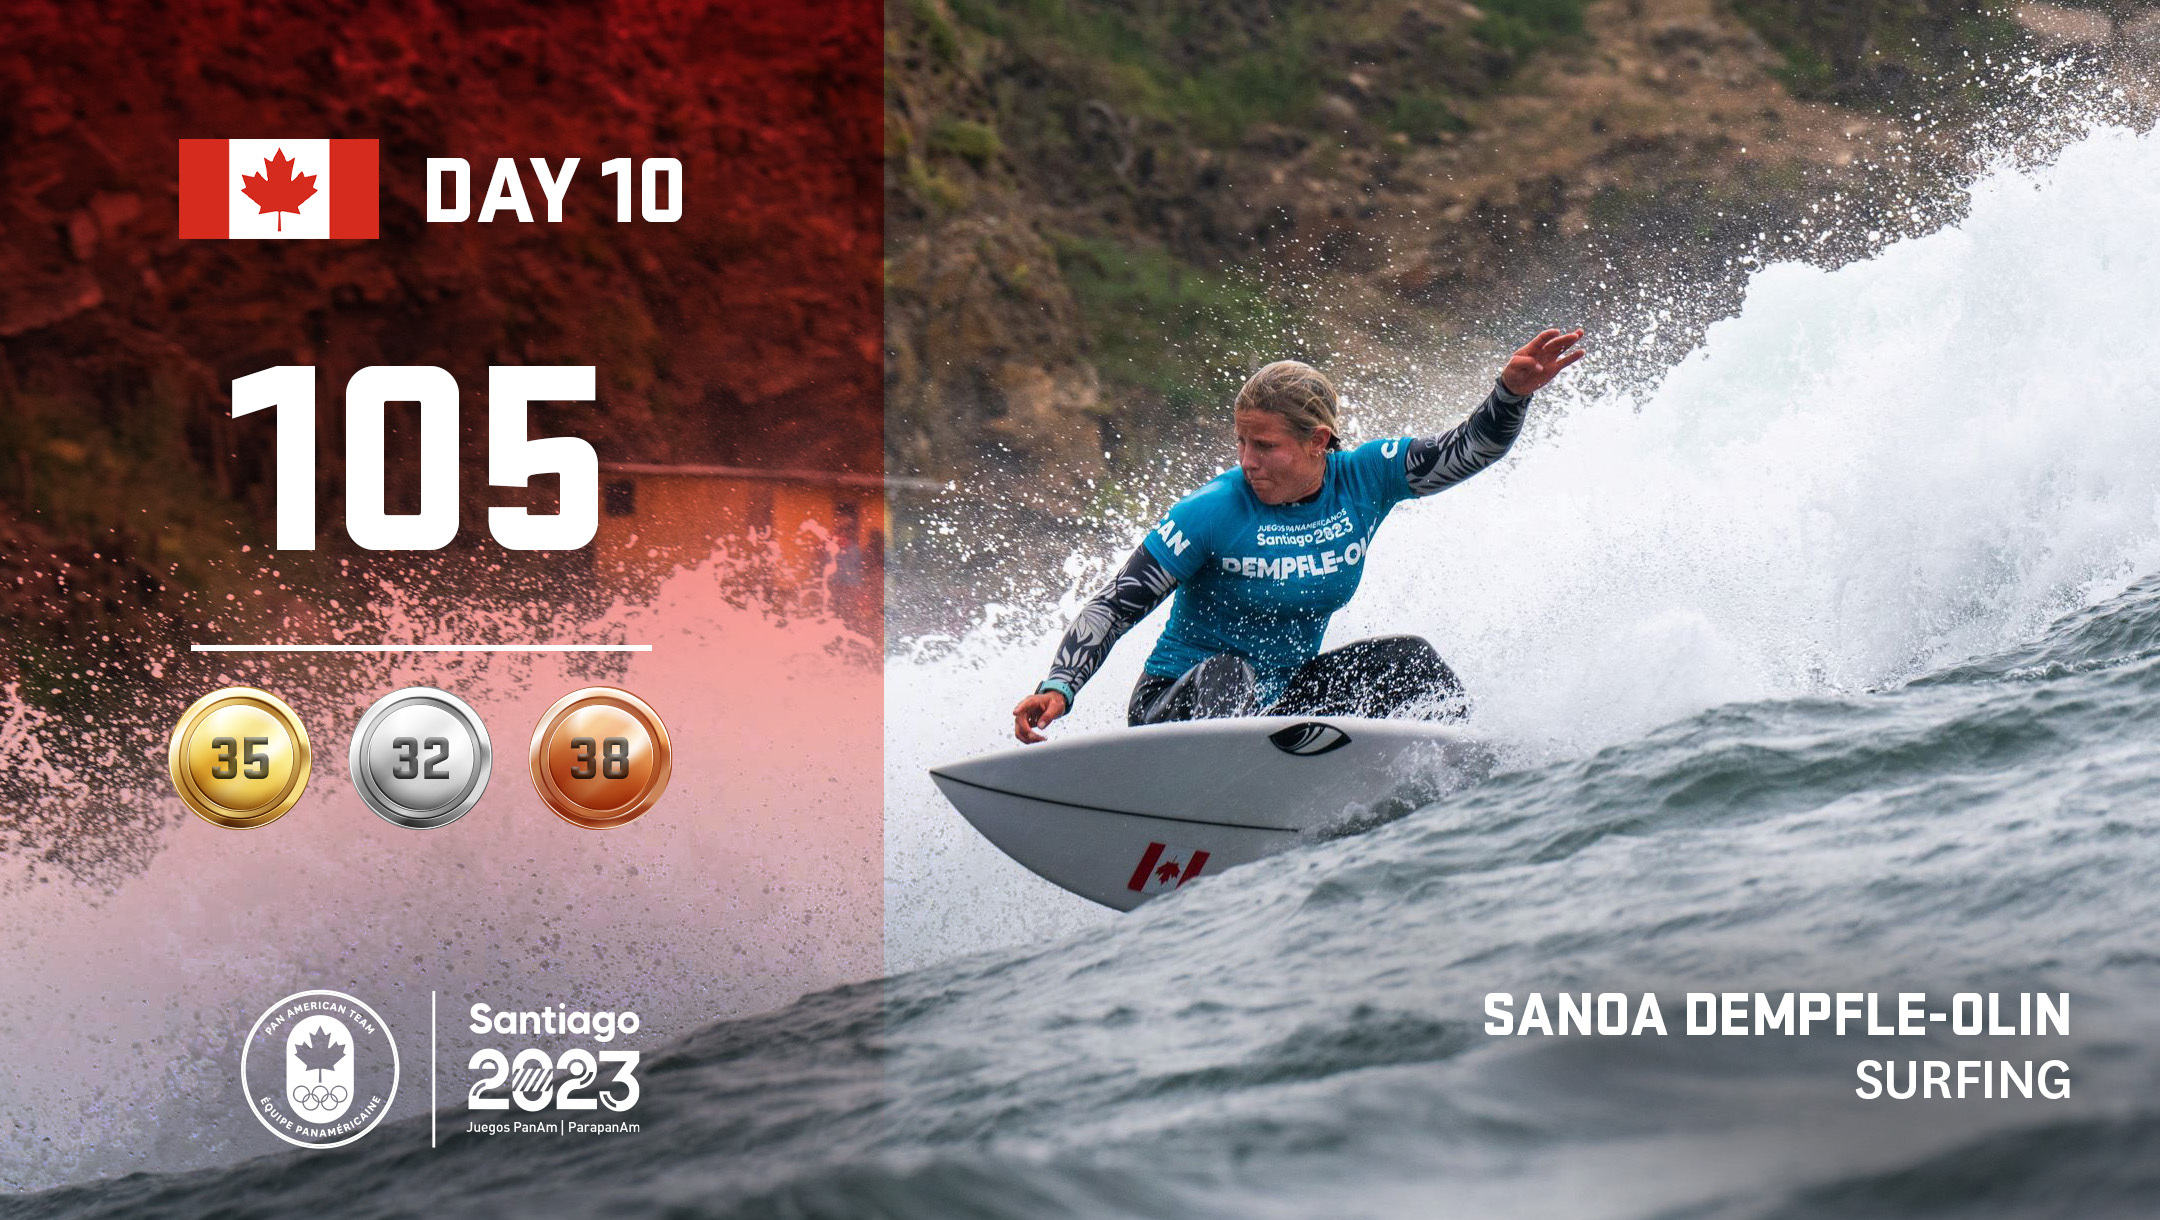 Day 10 at Santiago 2023: Dempfle-Olin surfs into Team Canada history books  - Team Canada - Official Olympic Team Website